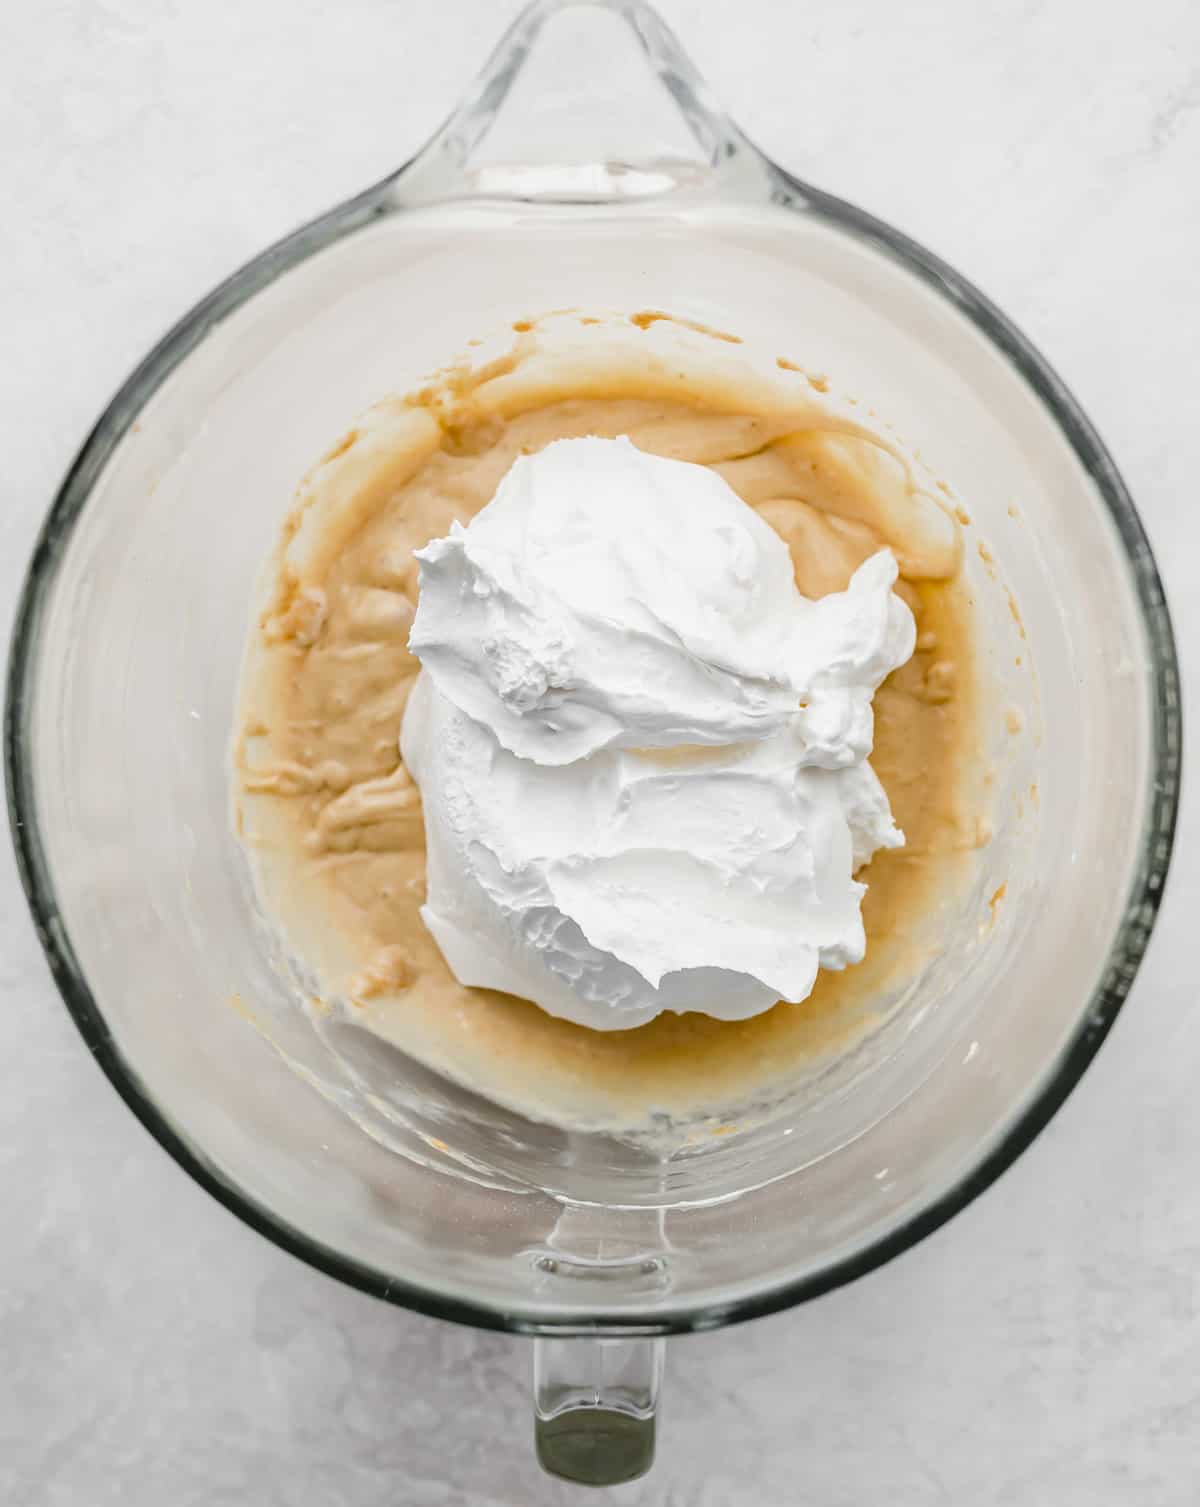 Cool whip on top of a peanut butter mixture in a glass bowl.